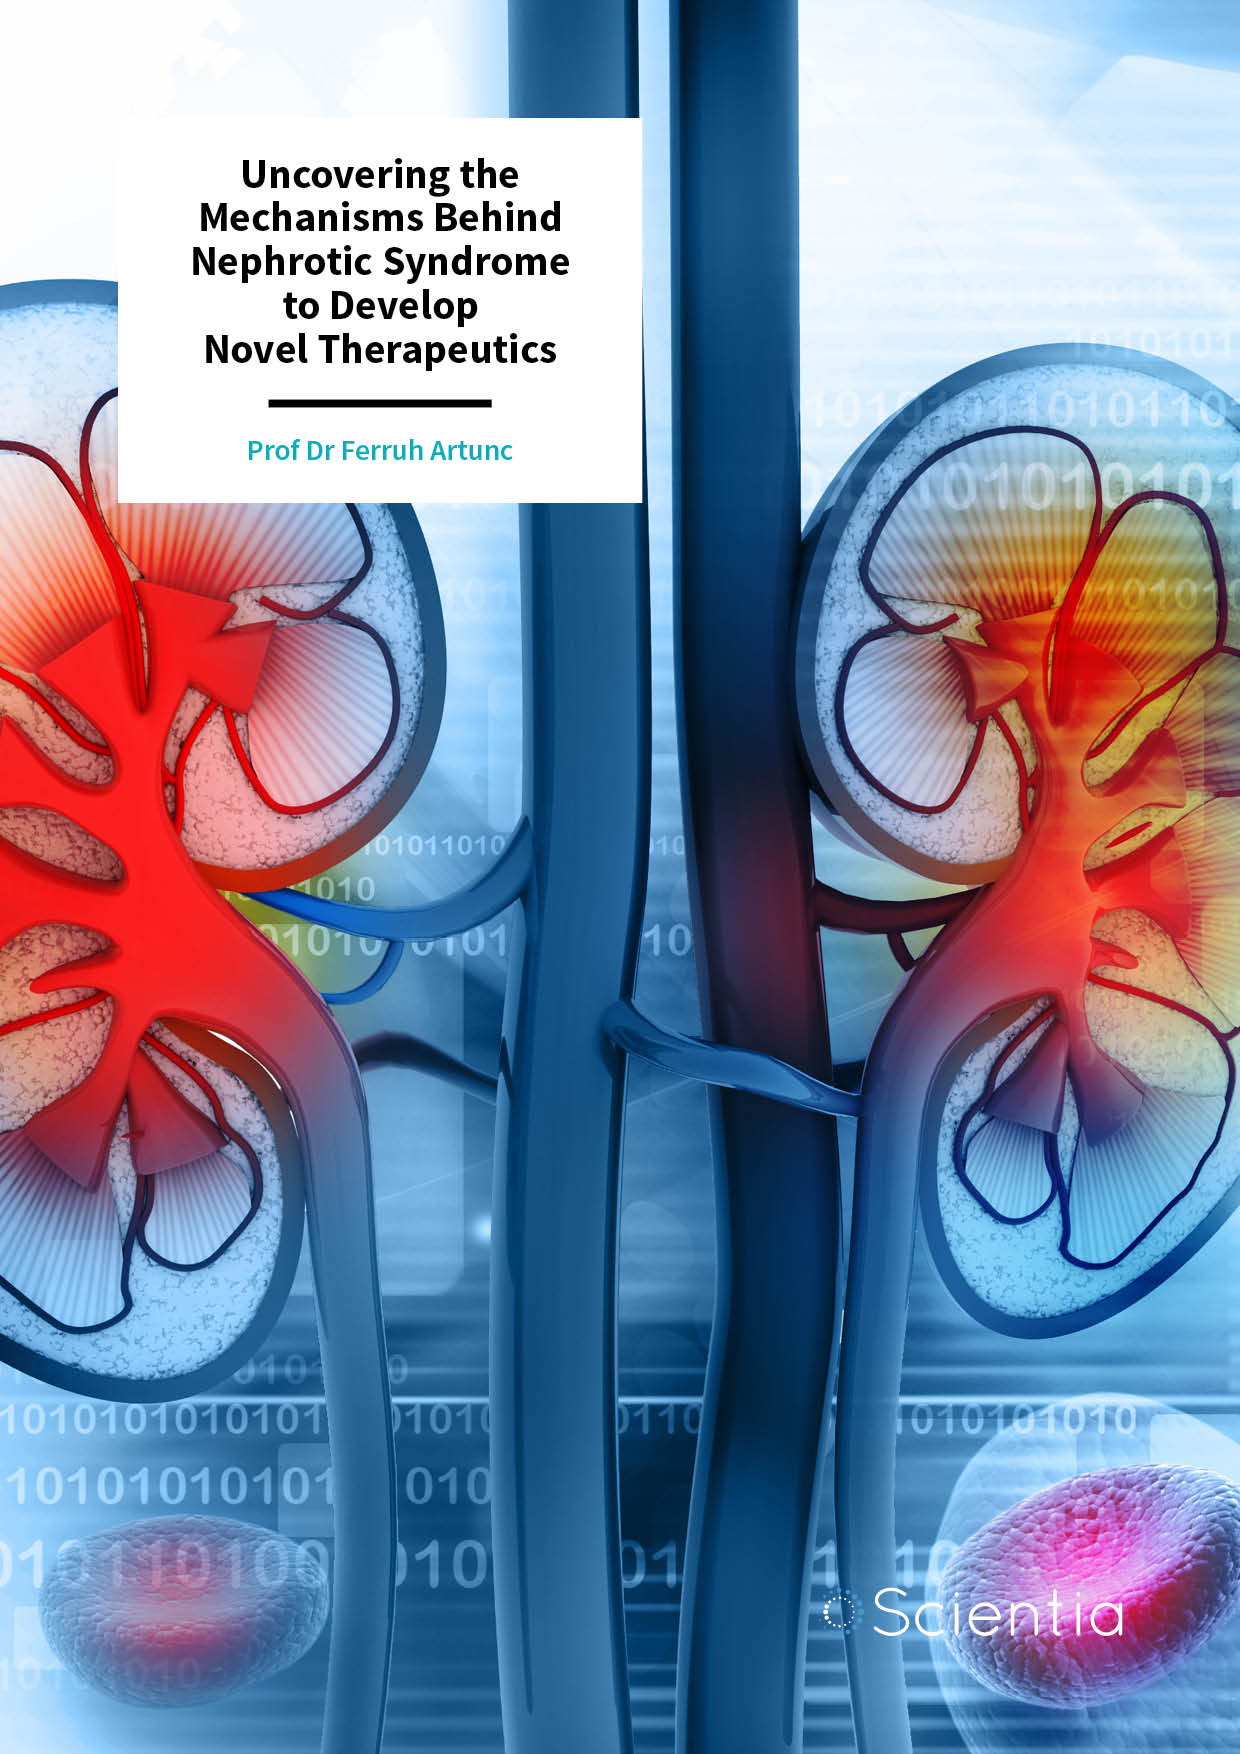 Prof Ferruh Artunc – Uncovering the Mechanisms Behind Nephrotic Syndrome to Develop Novel Therapeutics